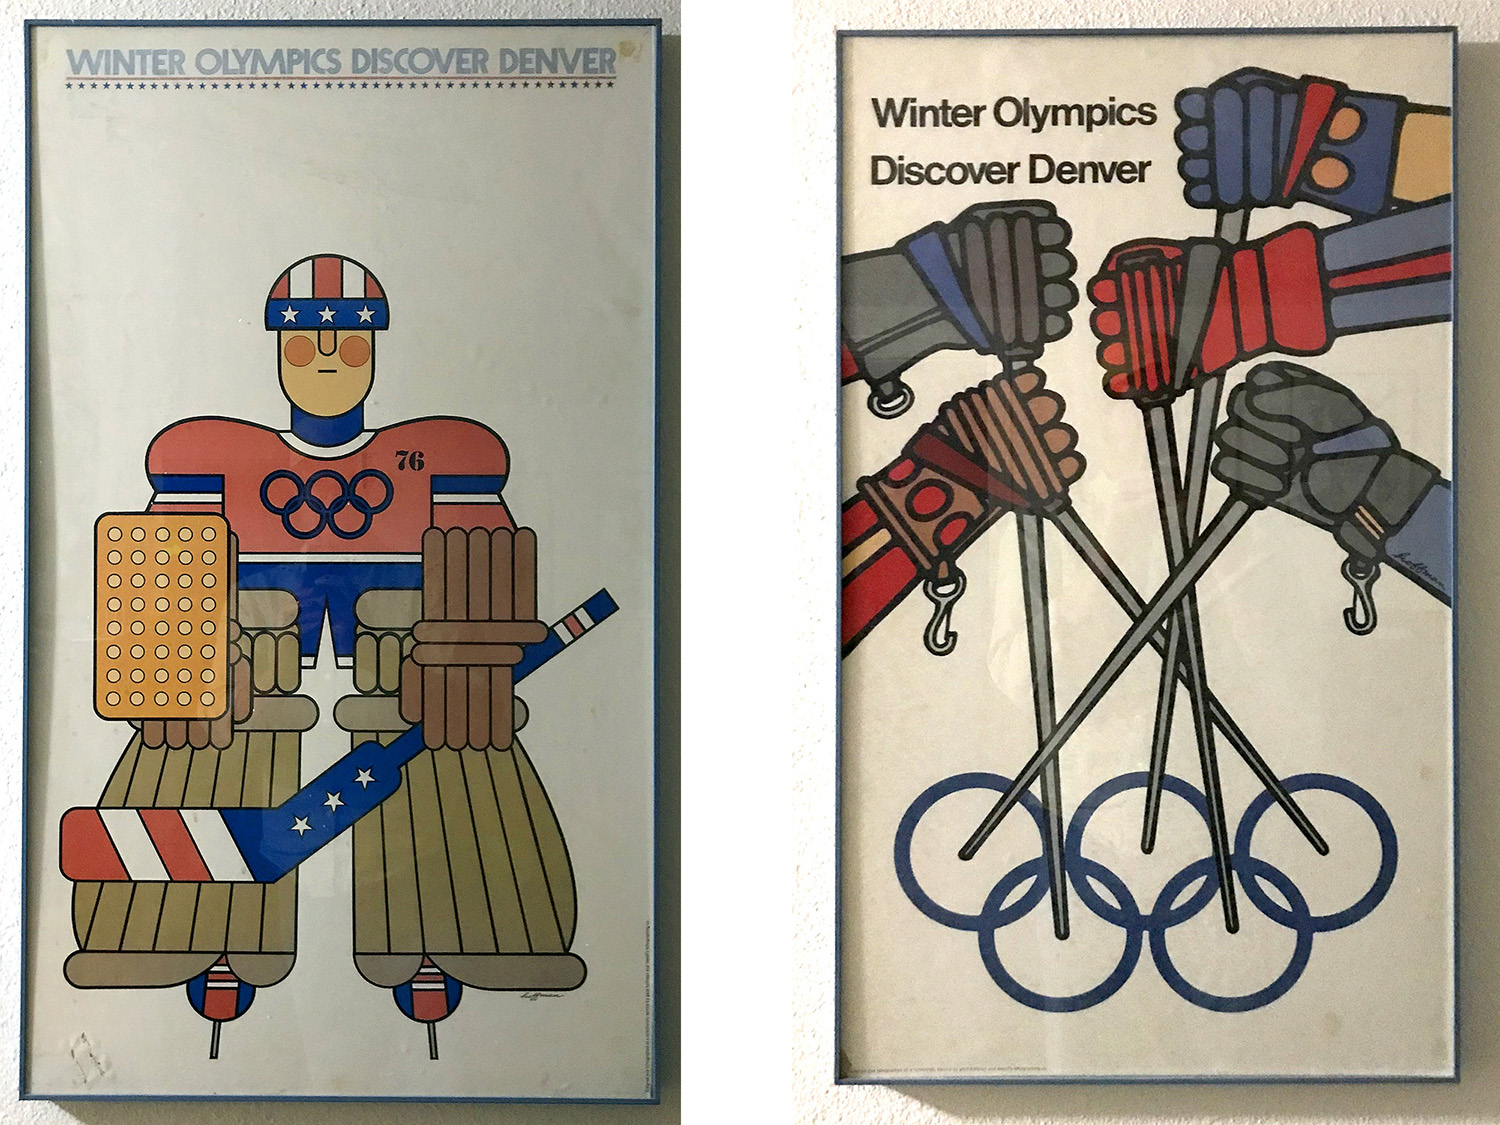 Alternative posters in support of the Olympic bid illustrated by Gene Hoffman